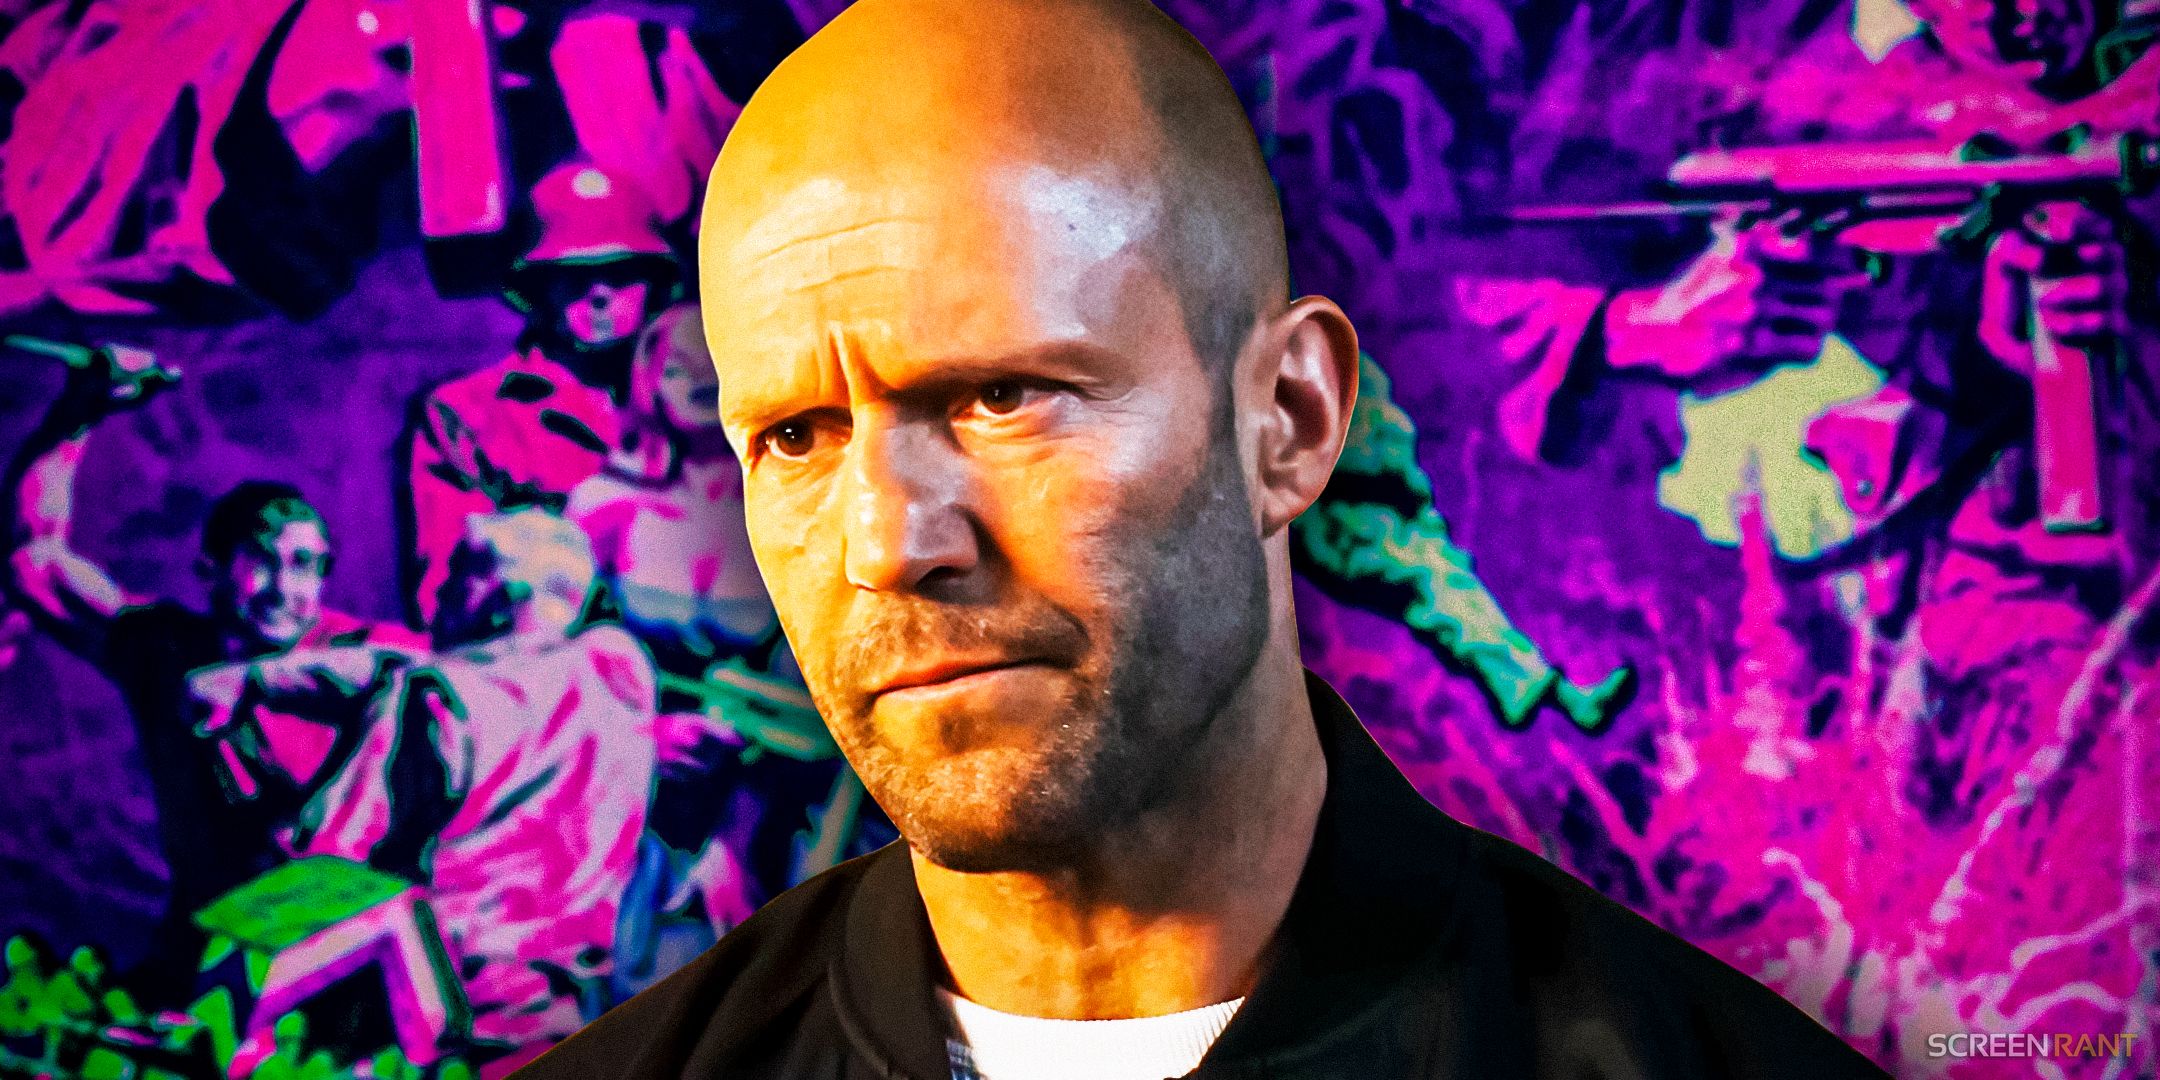 Jason Statham as a scrawling Lee Christmas from Expend4bles against the poster for The Dirty Dozen